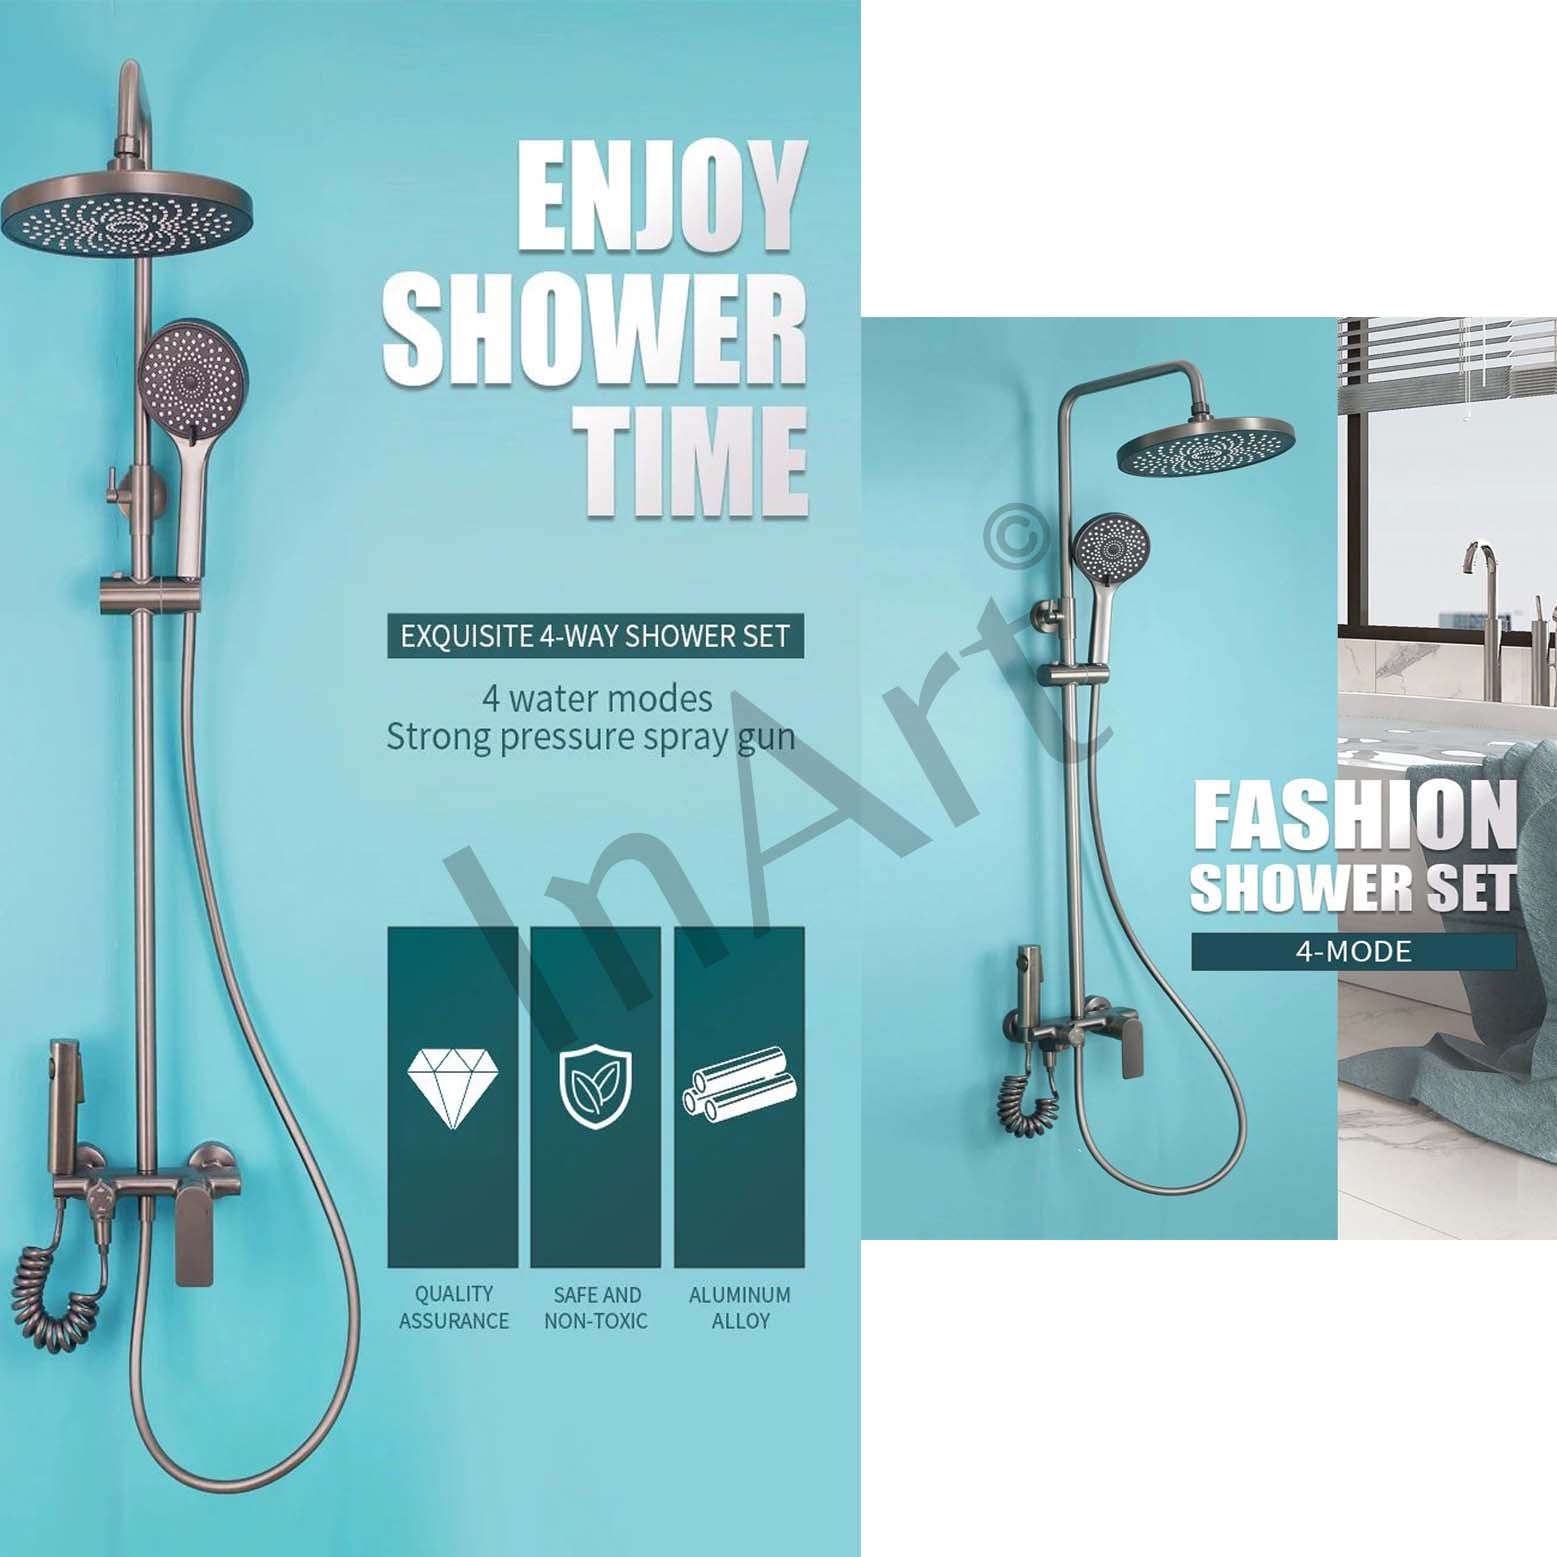 InArt Grey Stainless Steel Shower Panel Set with Single Lever Mixer - Includes Rainfall & Waterfall Overhead, Handheld Shower, Health Faucet & Accessories - InArt-Studio